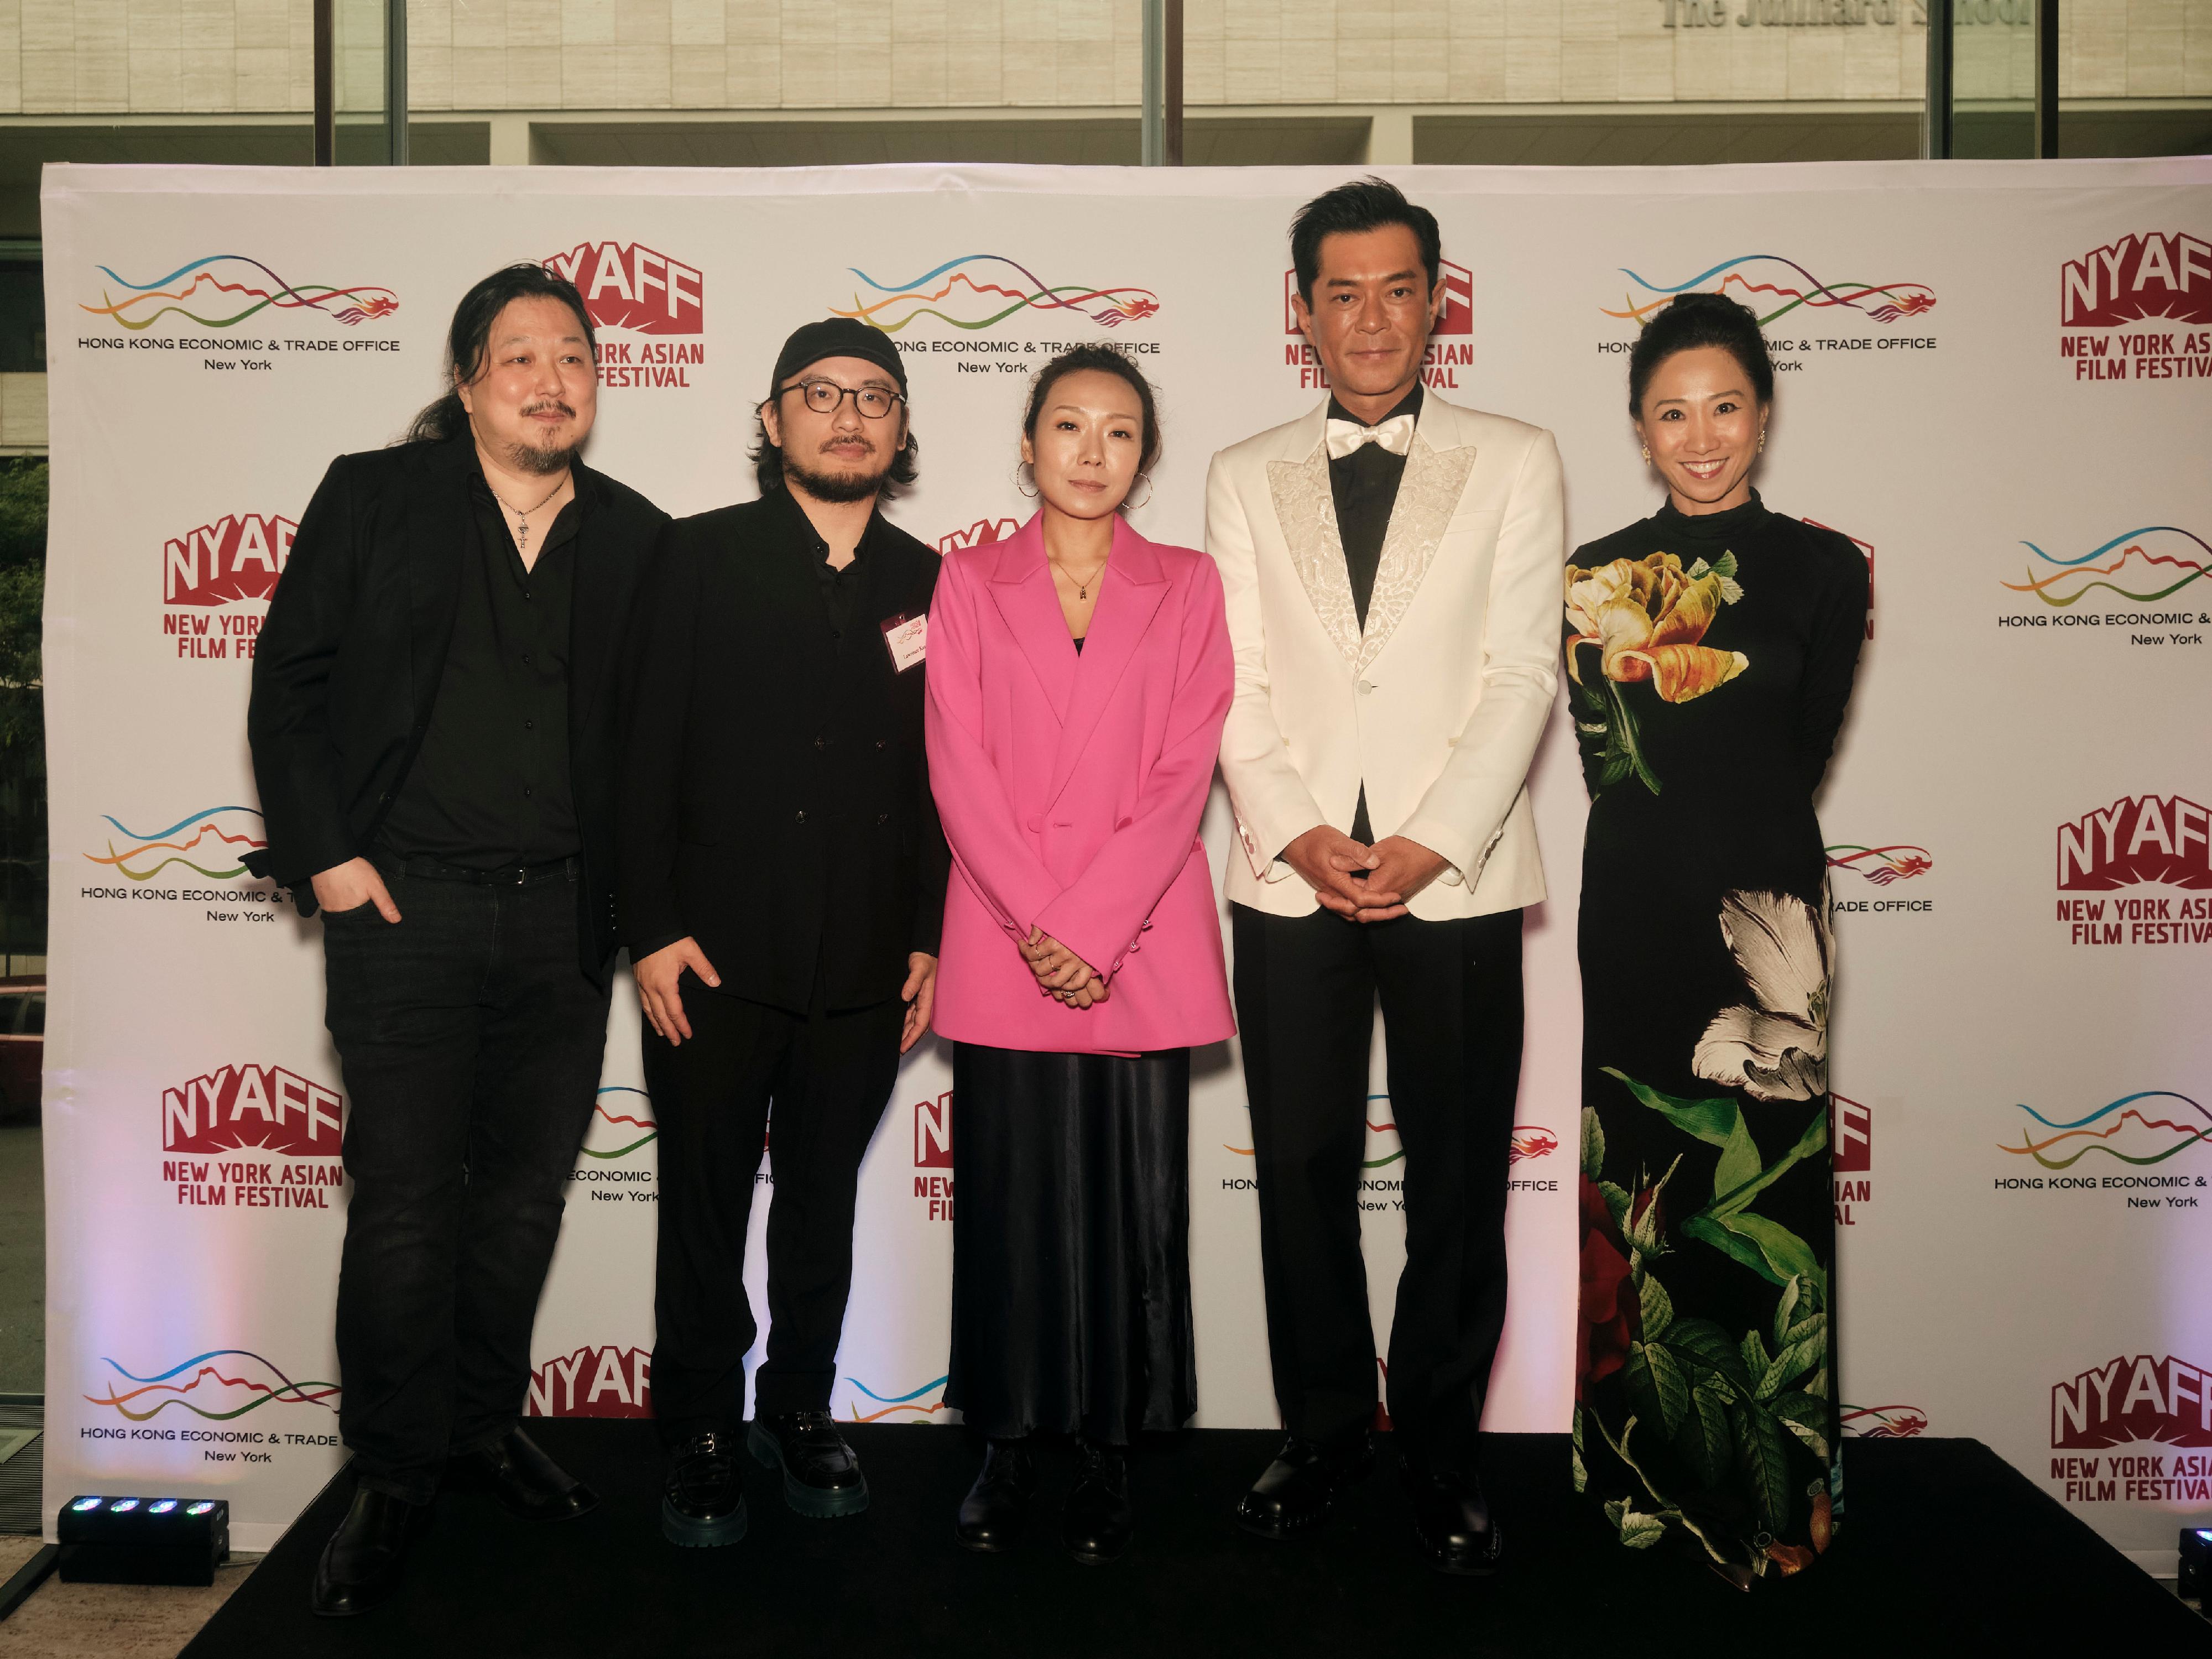 The Hong Kong Economic and Trade Office in New York (HKETONY) hosted a special reception honouring Hong Kong megastar Louis Koo, who was presented with the Extraordinary Star Asia Award for Exceptional Contribution to Asian Cinema by the New York Asian Film Festival (NYAFF) on July 19 (New York time). Pictured at the reception are (from right to left): the Director of the HKETONY, Ms Candy Nip; Koo; Director of "Vital Signs" Cheuk Wan-chi; Director of "In Broad Daylight" Lawrence Kan; and the Executive Director of the NYAFF, Mr Samuel Jamier.